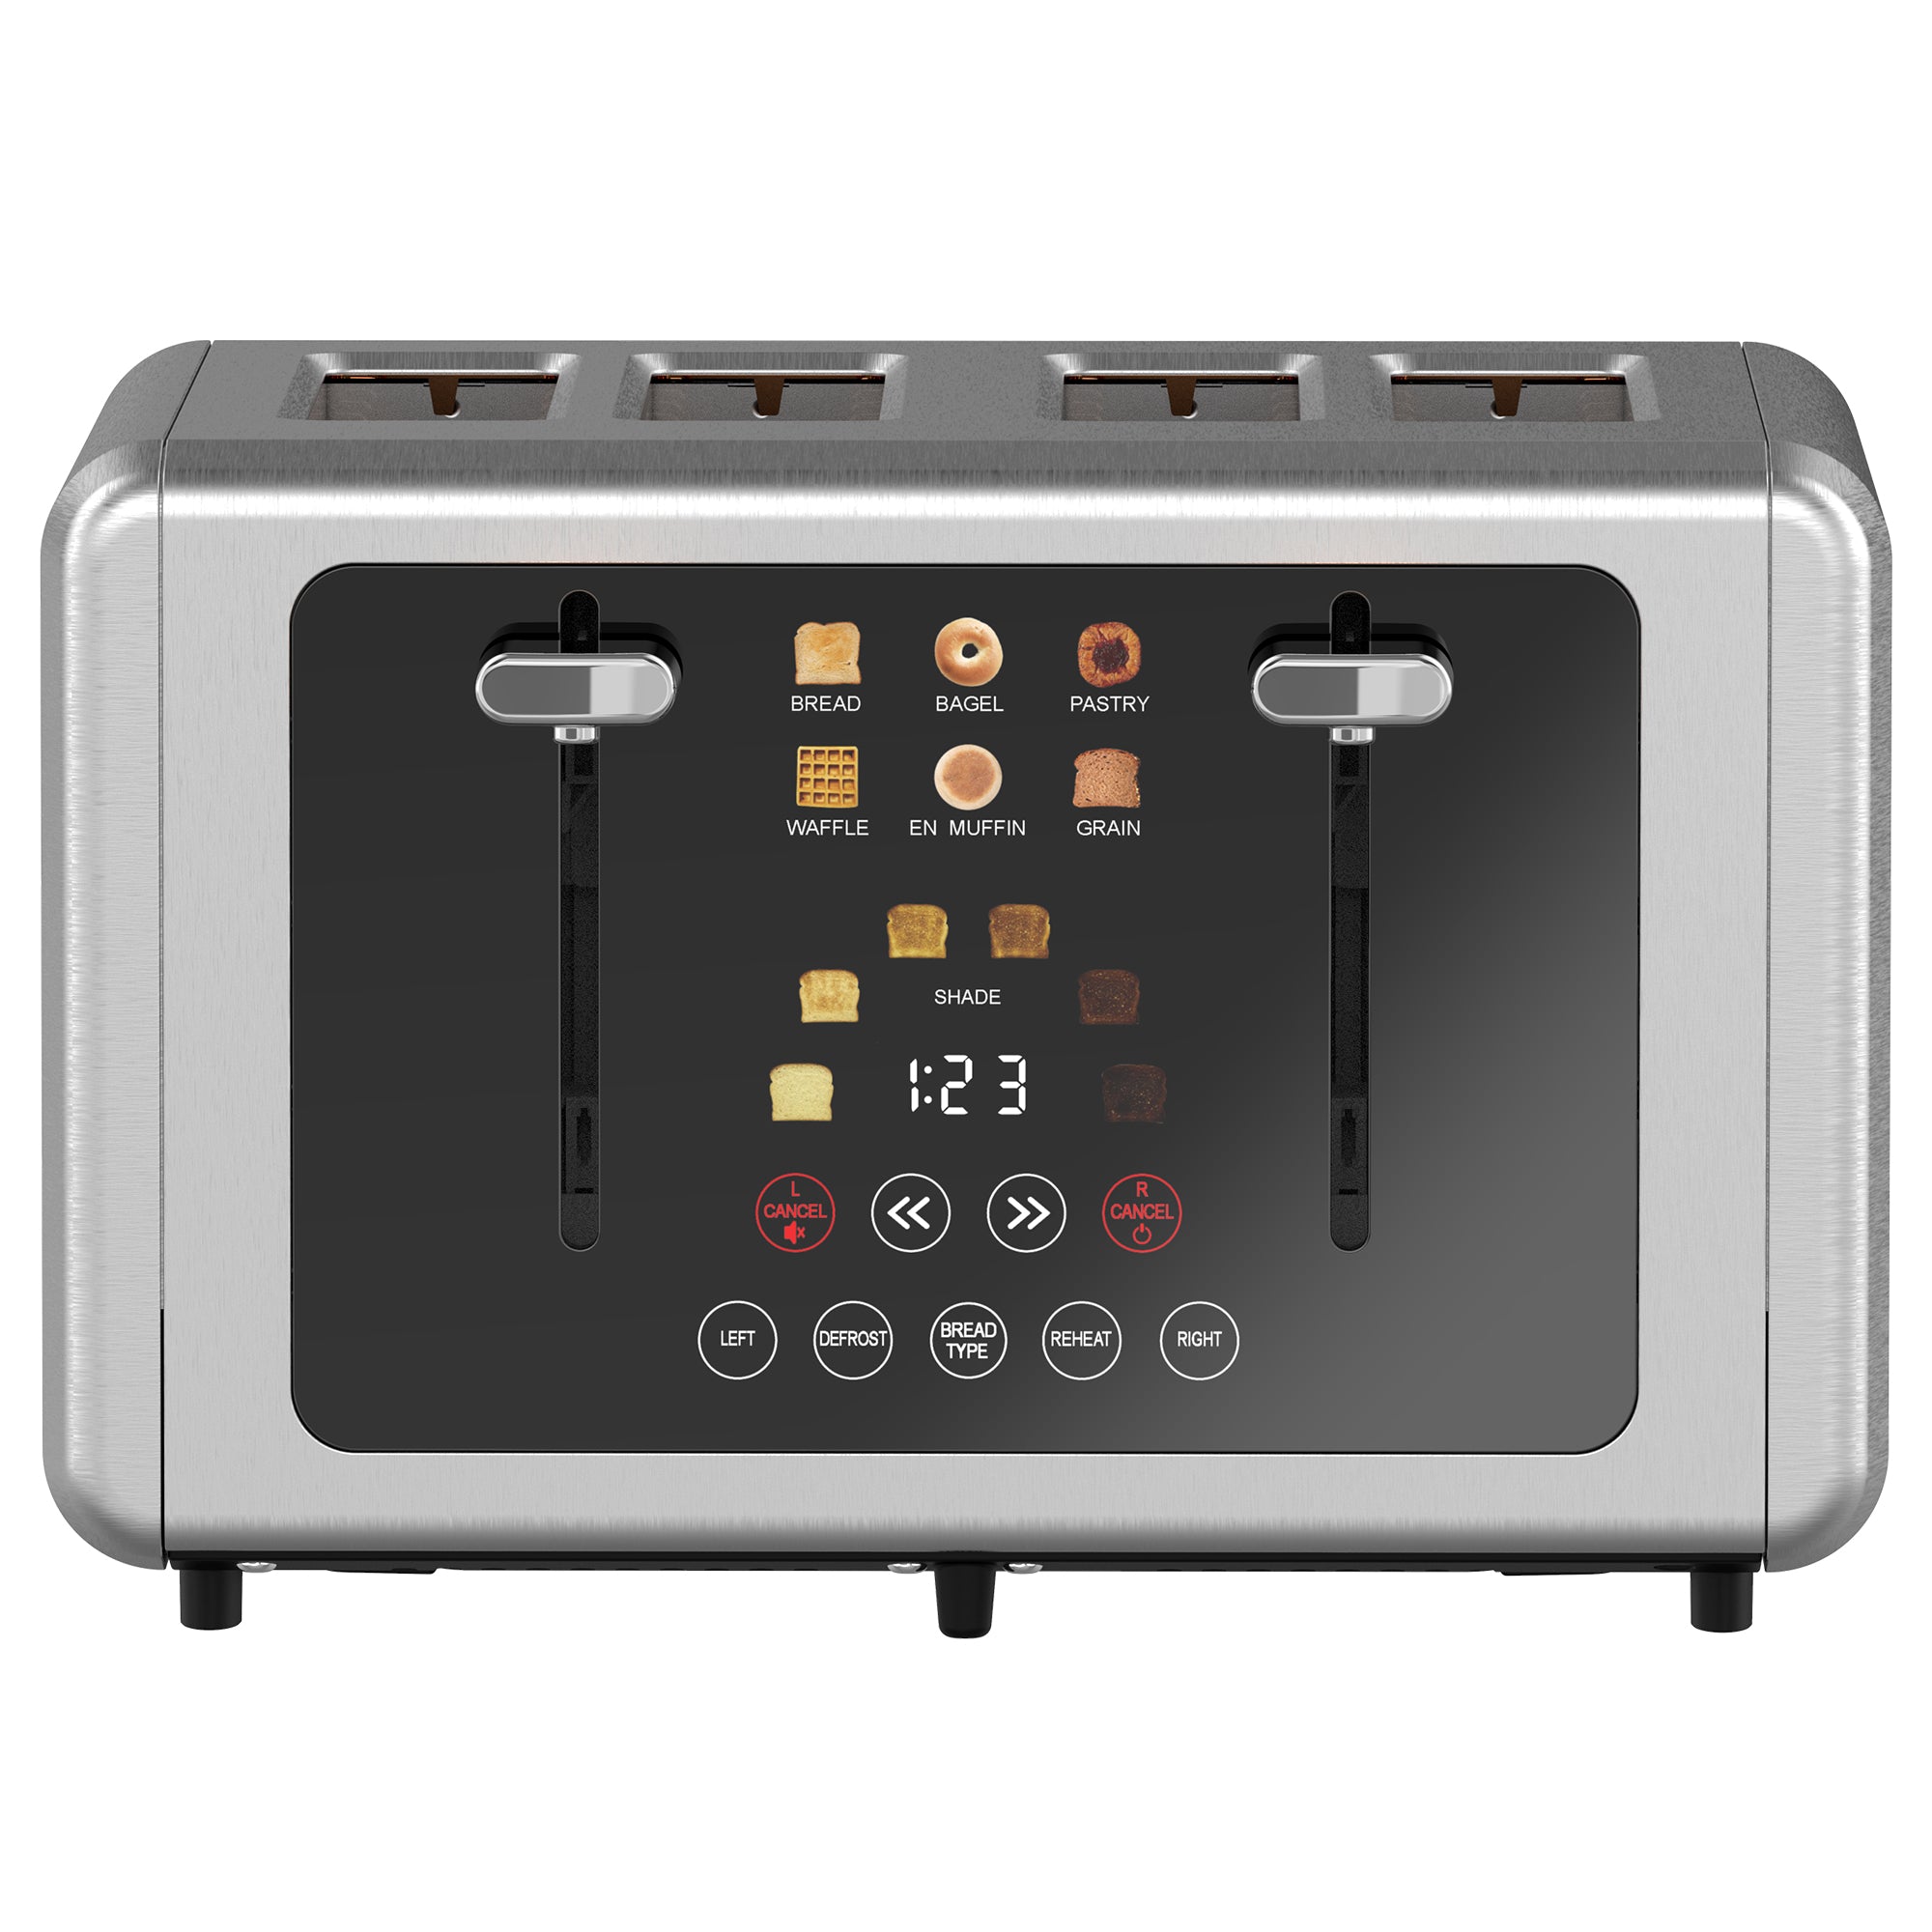 WHALL® Touch Screen Toaster 4 Slice | Stainless Steel, Digital Timer, Sound | 6 Bread Types & Shades